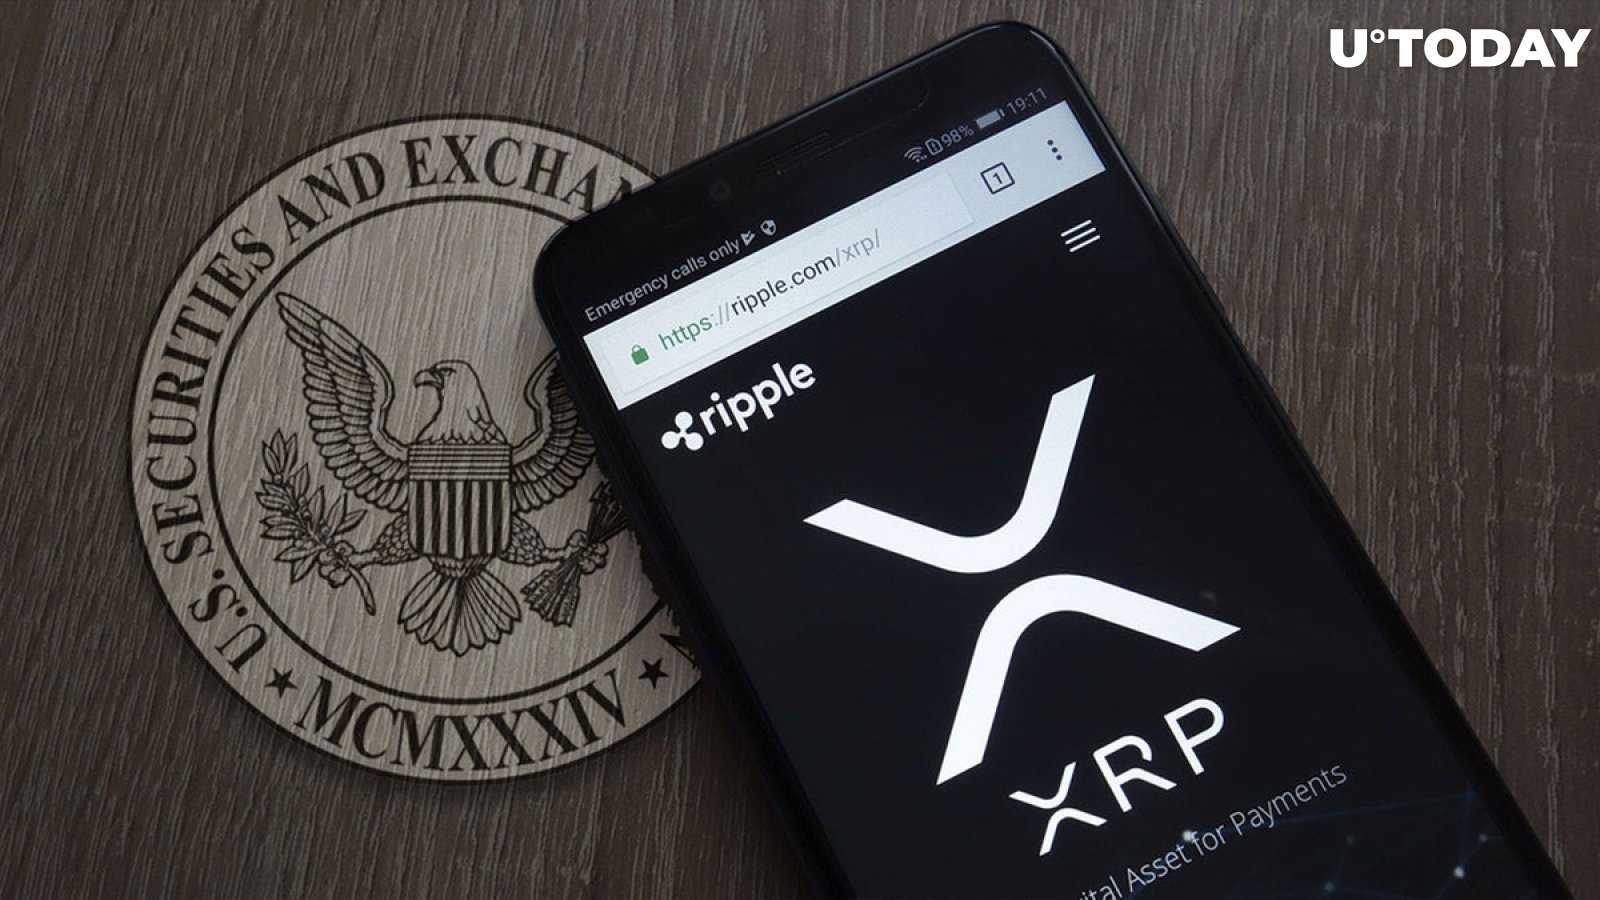 XRP Holders' Lawyer on What Is Needed to Fight SEC